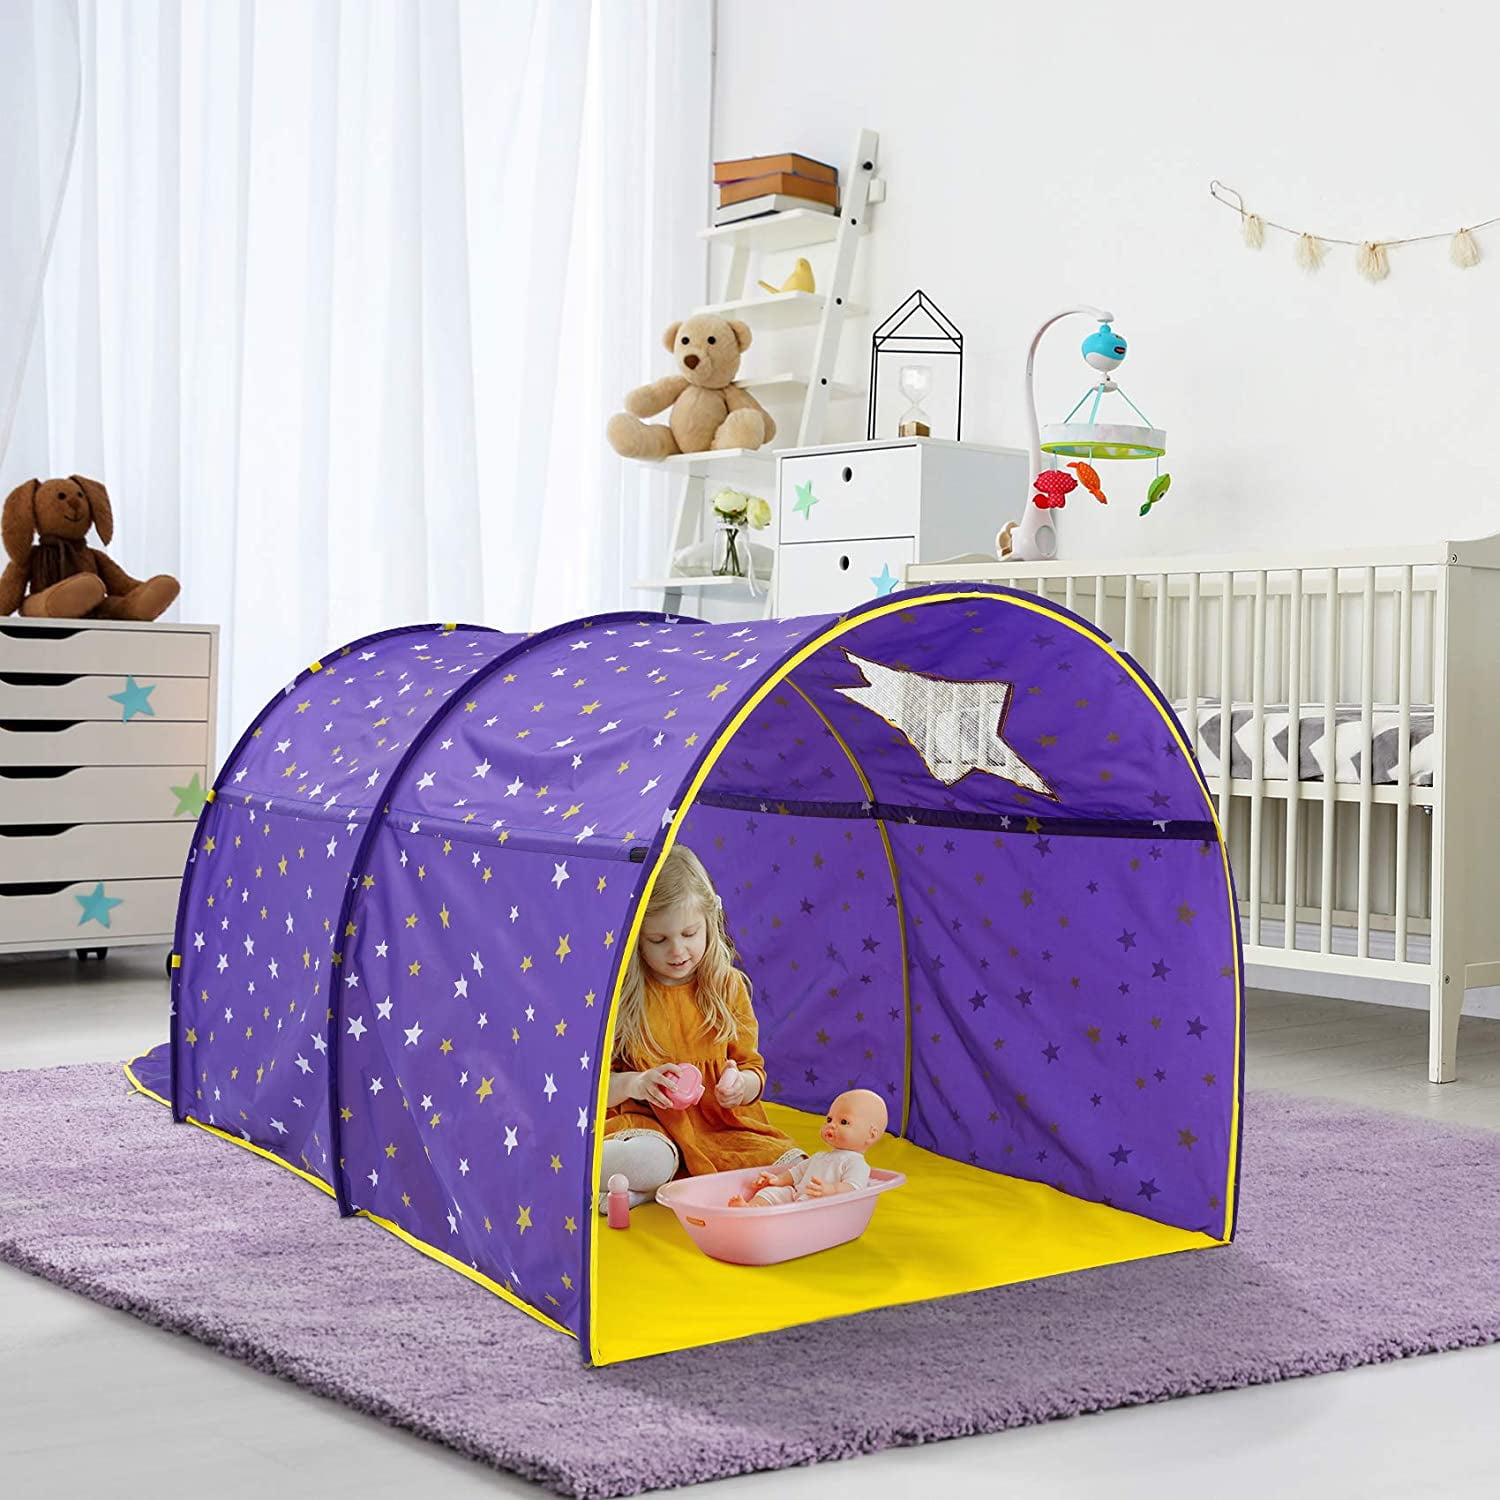 Kids Bed Dream Tents Foldable Outdoor Unicorn Fantasy Baby LED Lights Play Tent 